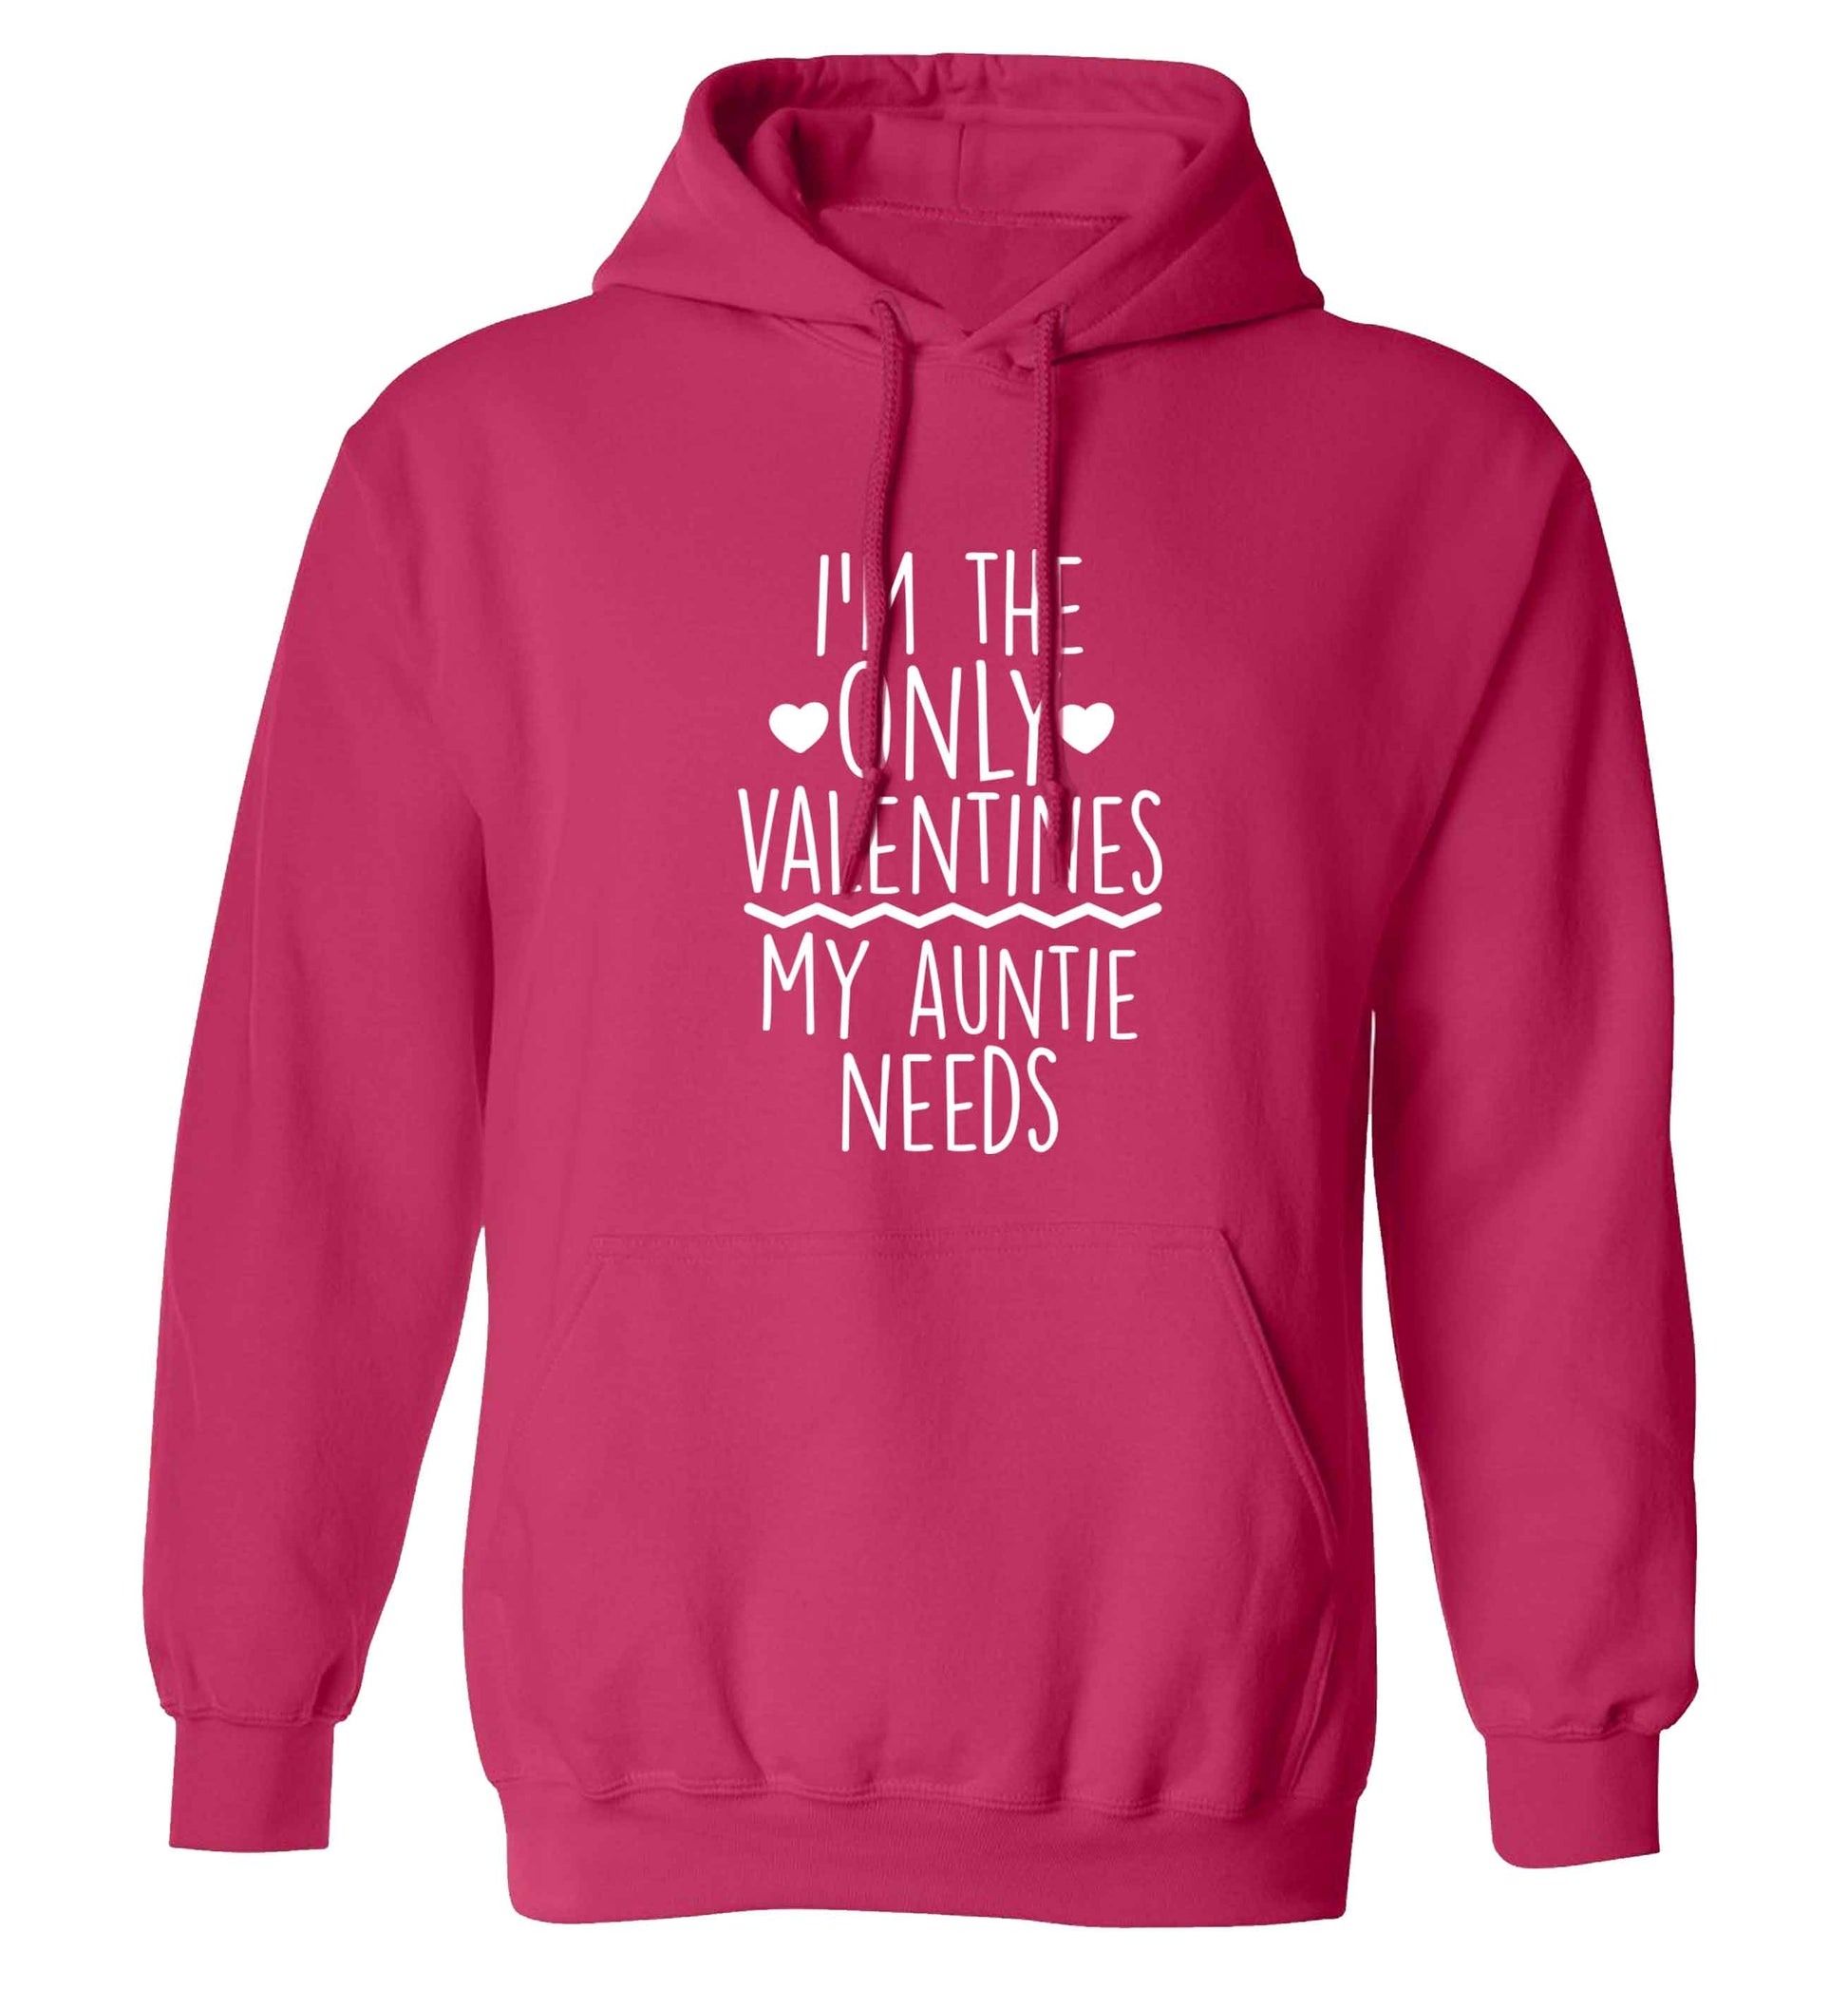 I'm the only valentines my auntie needs adults unisex pink hoodie 2XL